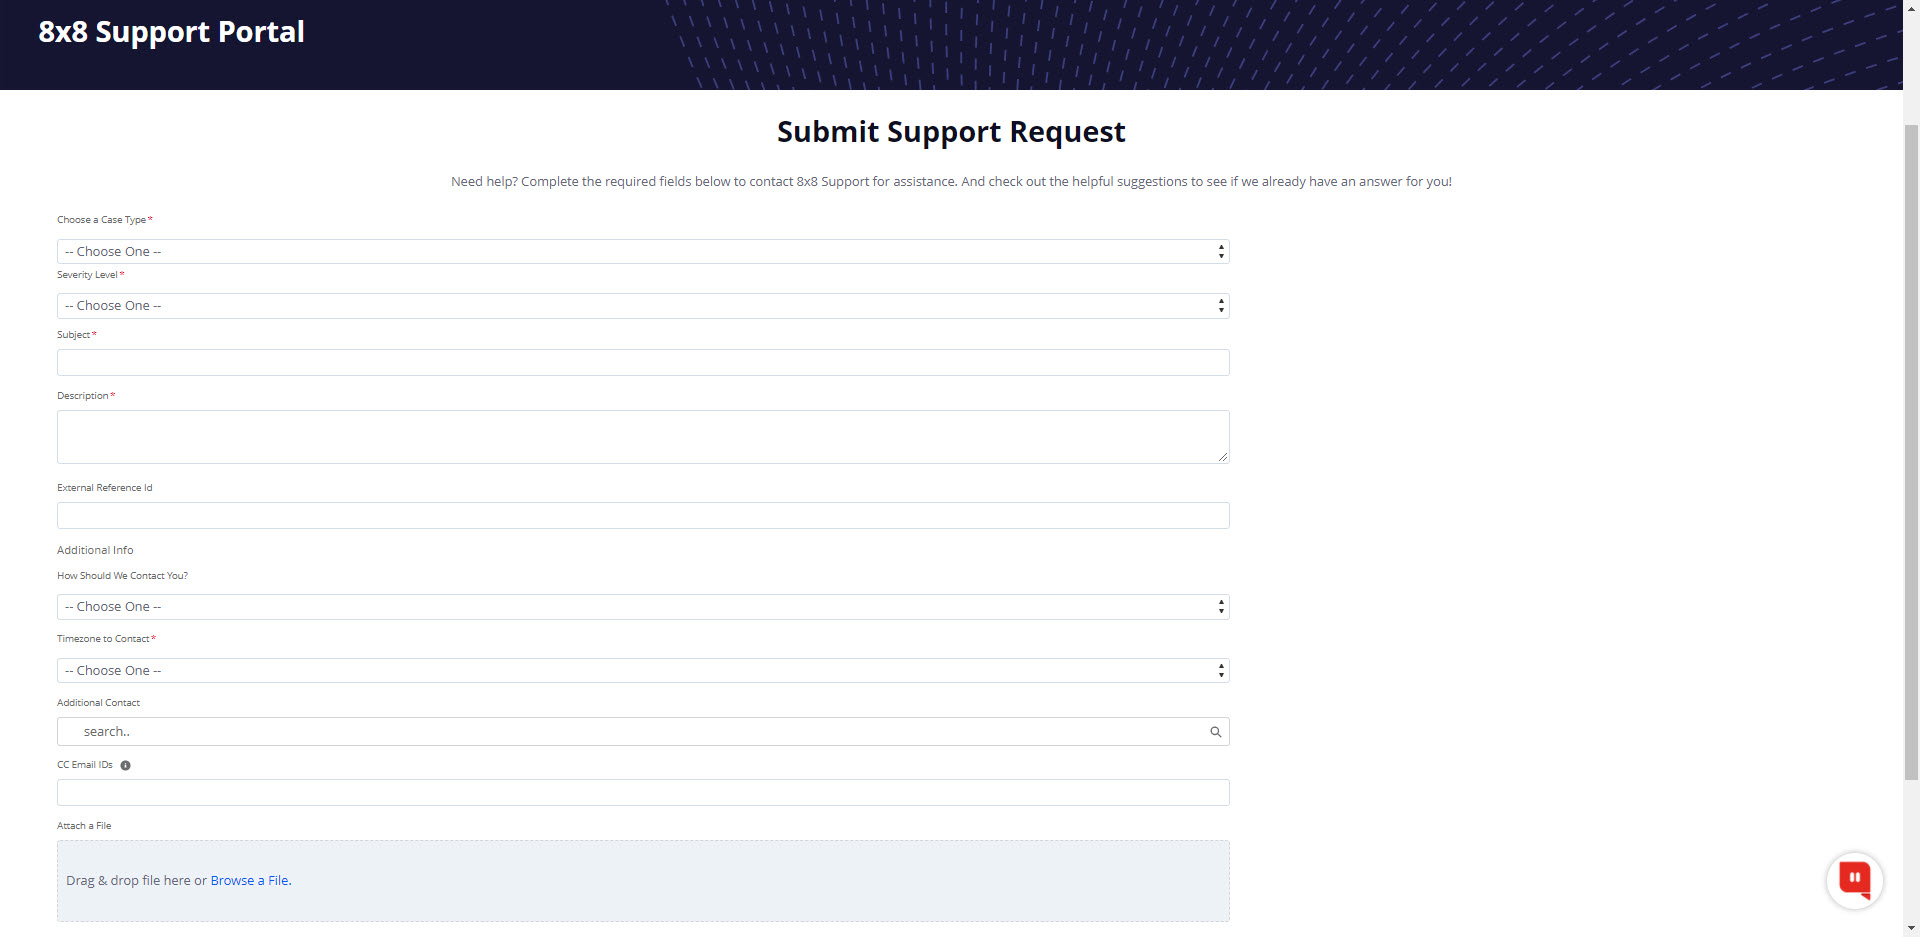 8x8 Support Portal Request Form.jpg